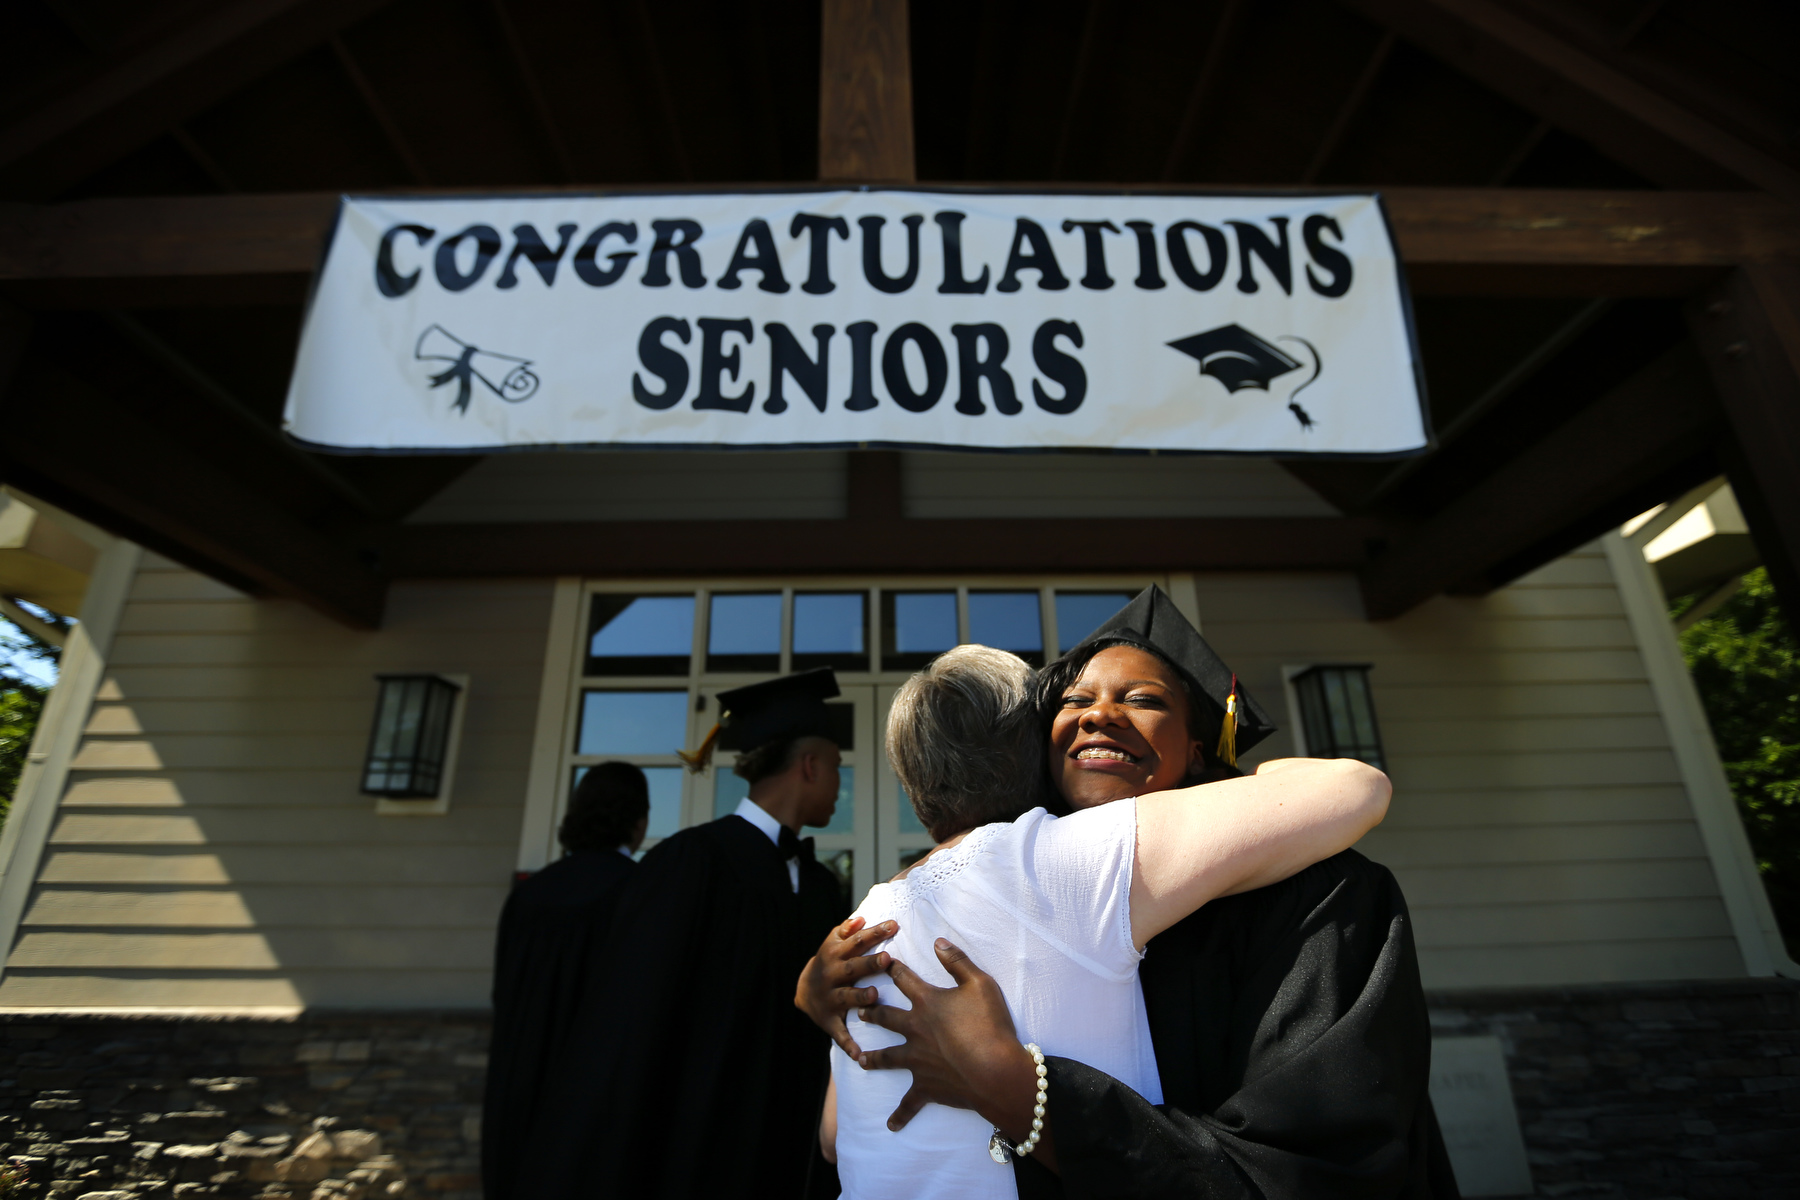 May 22, 2016 - Autumn Jones embraces St. George's former dean of students Jill Reilly shortly before graduation on the St. George's Collierville campus. Reilly, who spent 11 years at the school, began forging a relationship with the students  through regular visits to the Memphis campus beginning in third grade before they made the transition to Collierville in the sixth grade where she taught math. {quote}She was like one of our mothers.{quote} Jones said. {quote}She had high expectation and made sure we knew what we could do and were capable of.{quote} (Mike Brown/The Commercial Appeal)